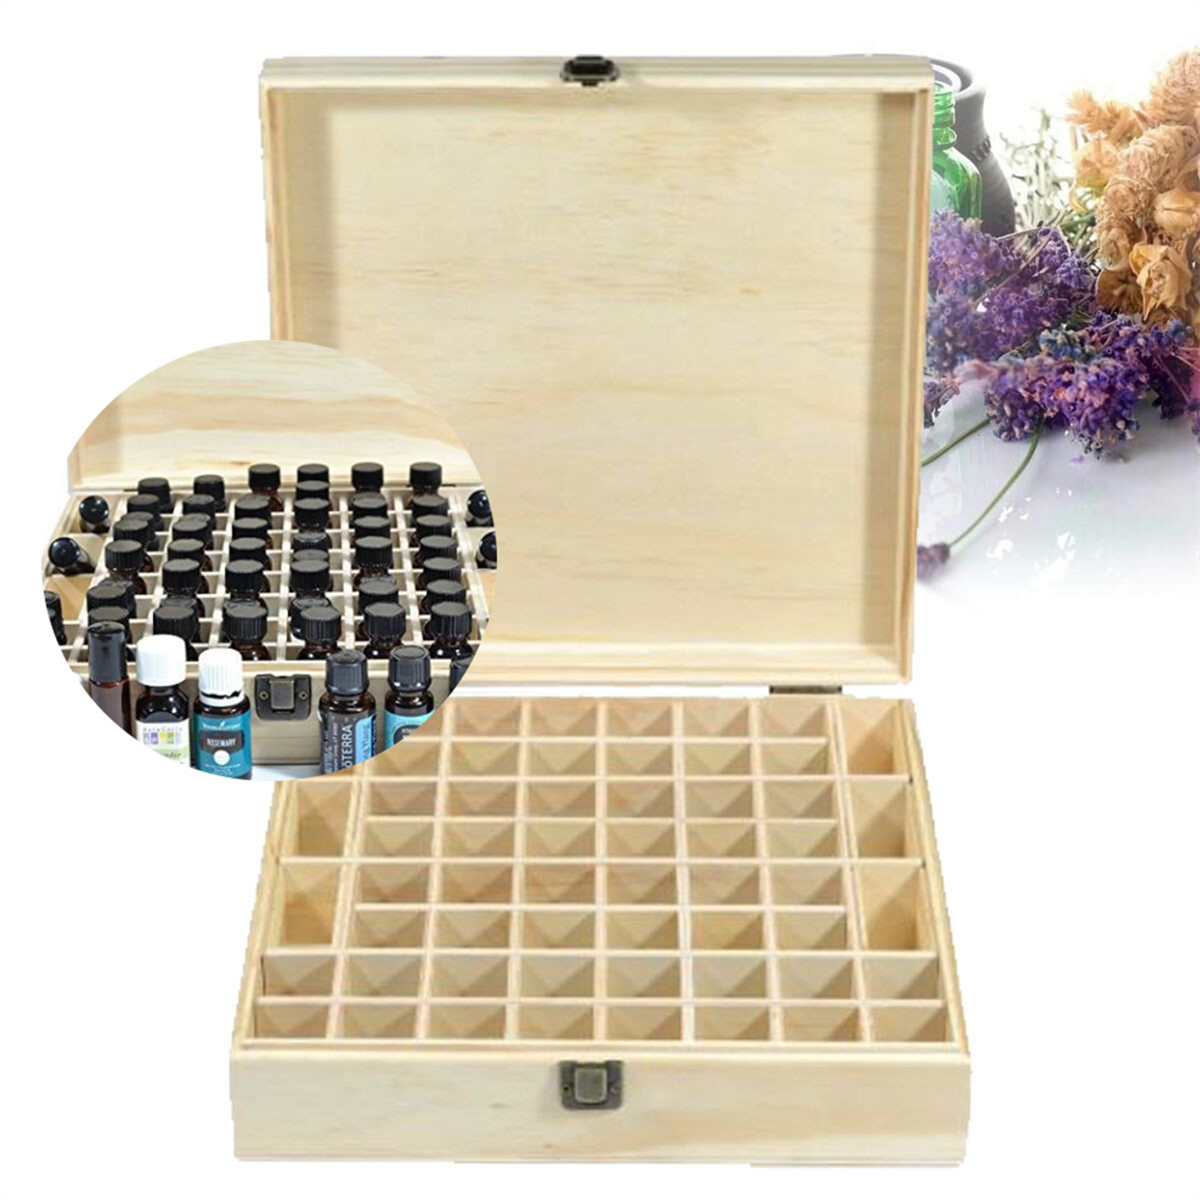 

58 Slots Essential Oil Storage Box Wooden Case Container Aromatherapy Organizer Display Box